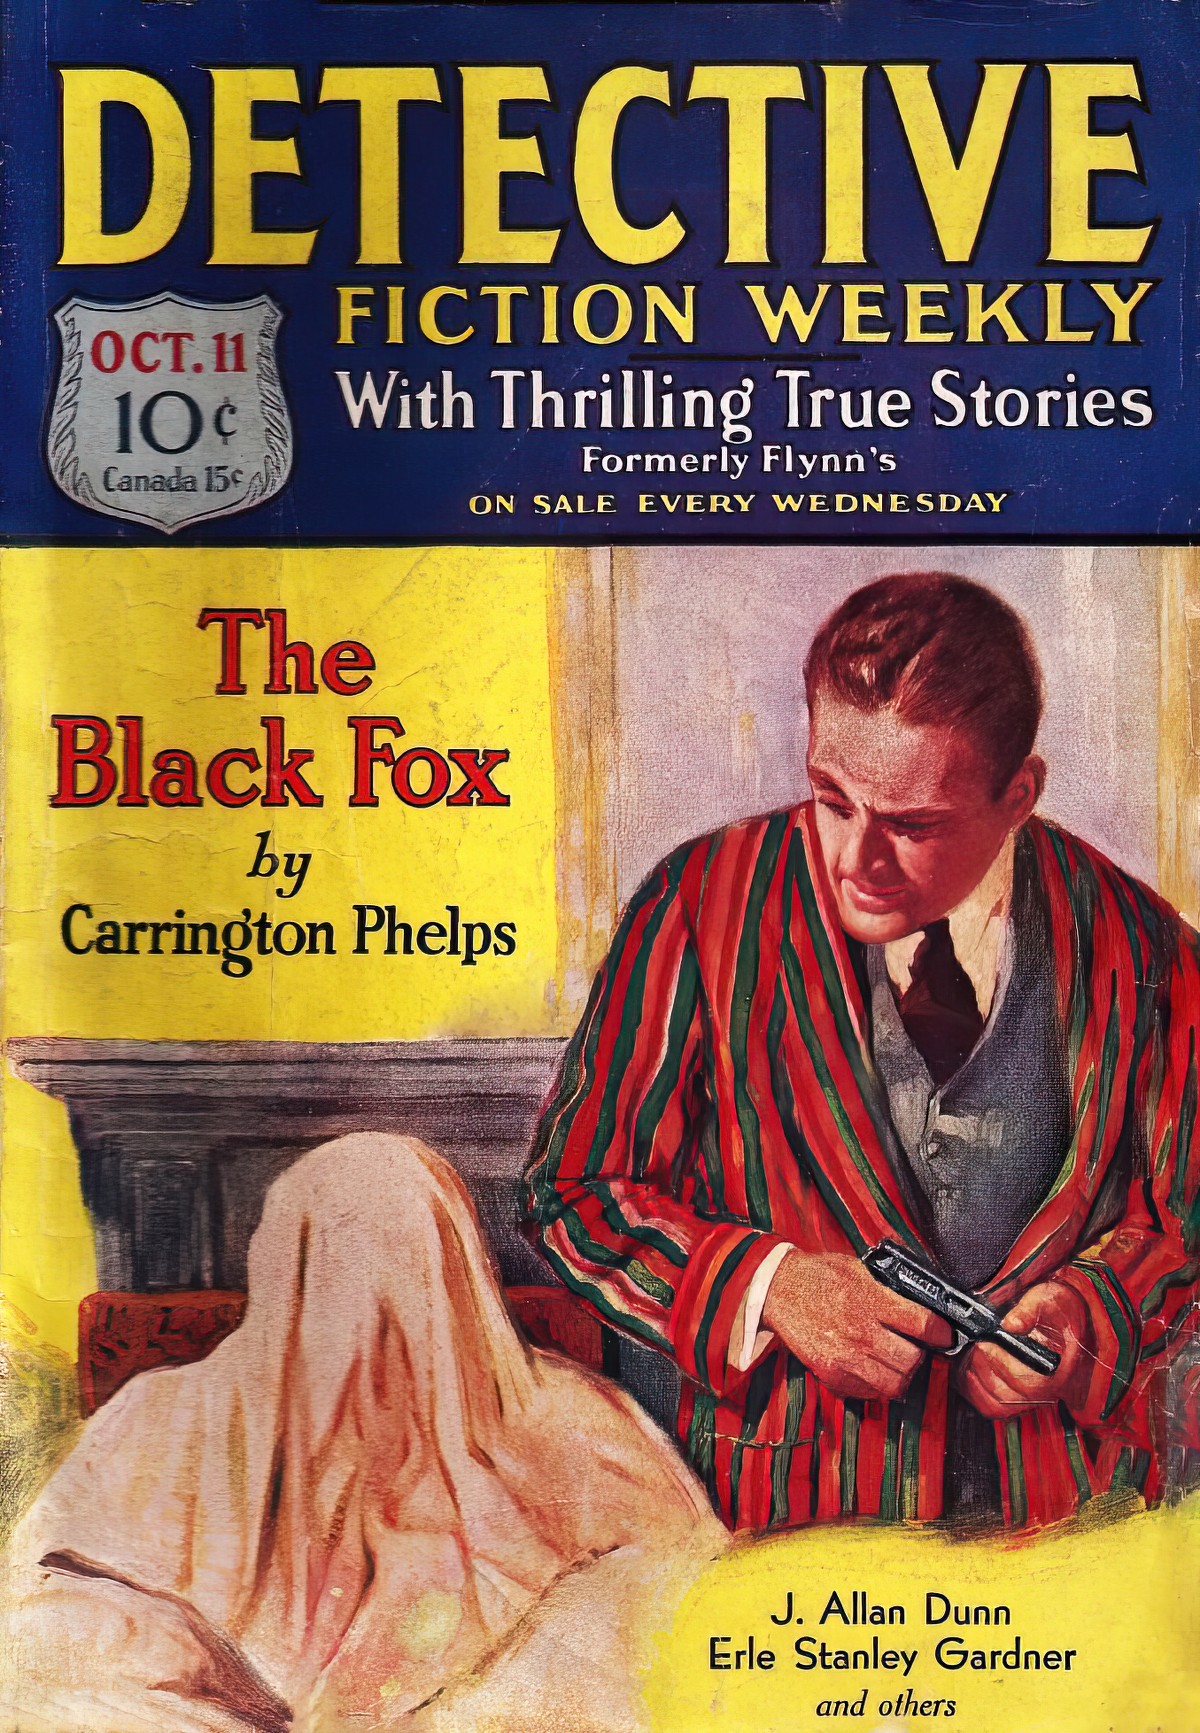 Detective Fiction Weekly - Vol. 53 #5 - Oct. 11, 1930